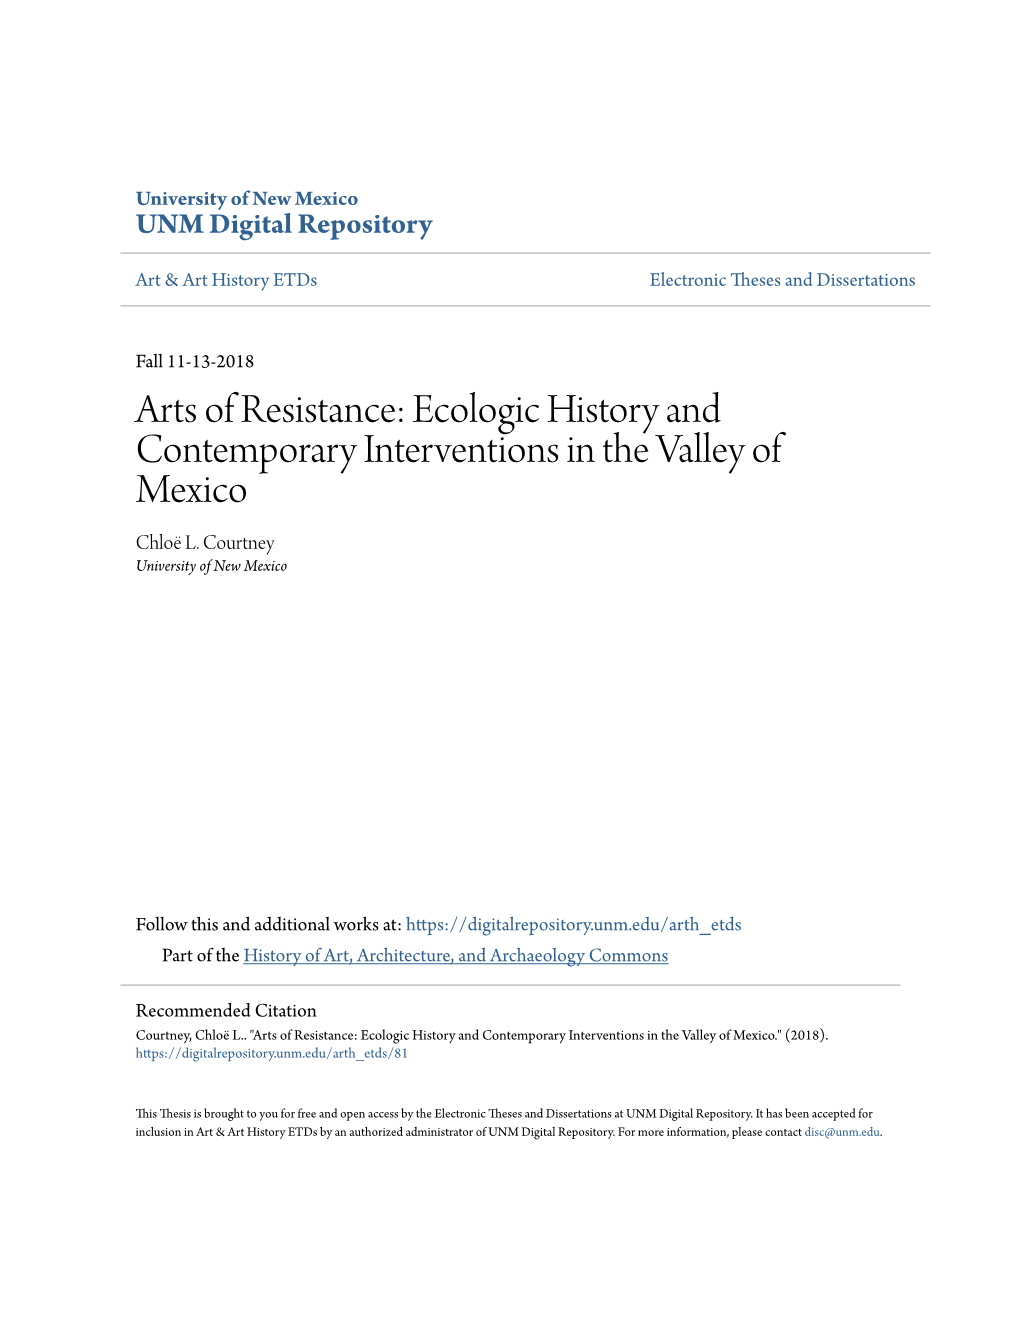 Ecologic History and Contemporary Interventions in the Valley of Mexico Chloë L